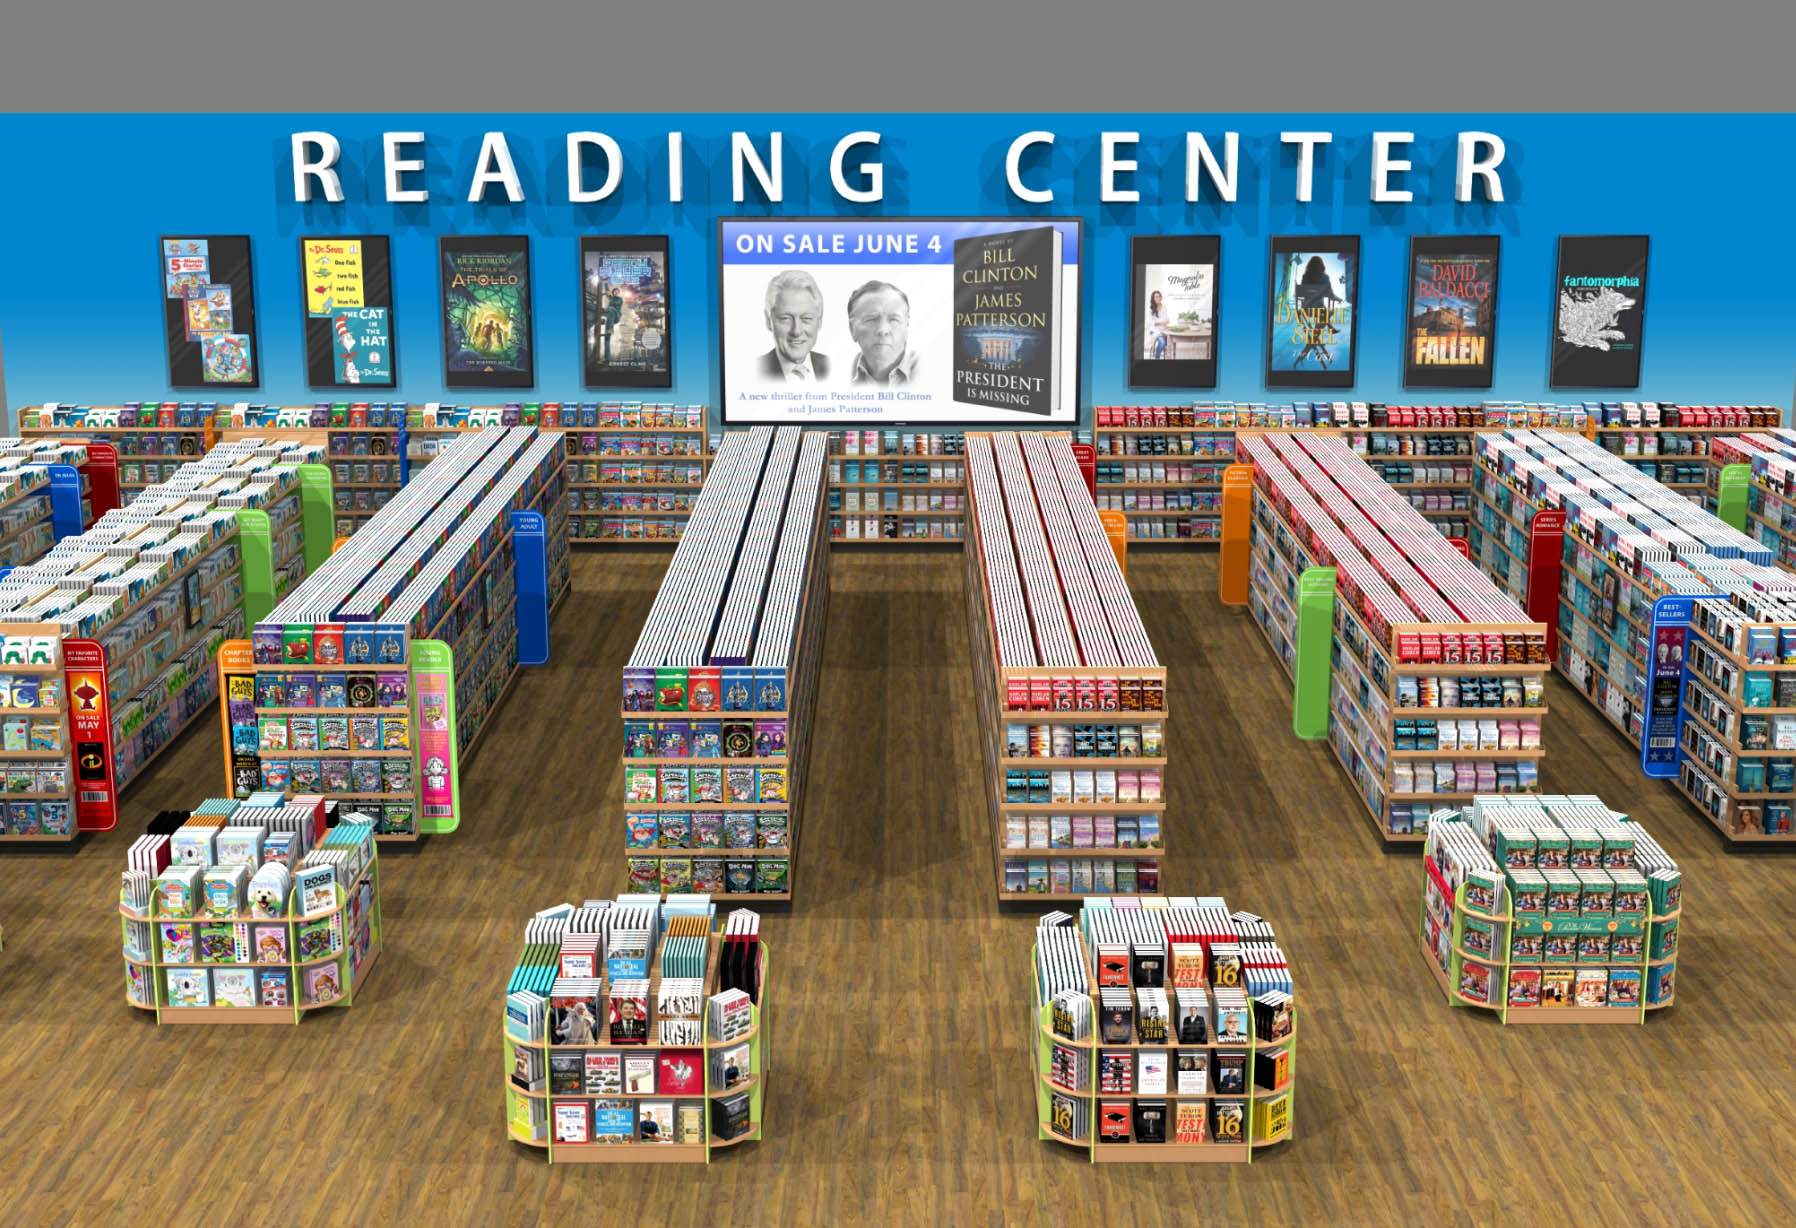 Rending of a Reading Center in the middle of a retail store endcaps and displays featuring ReaderLink books